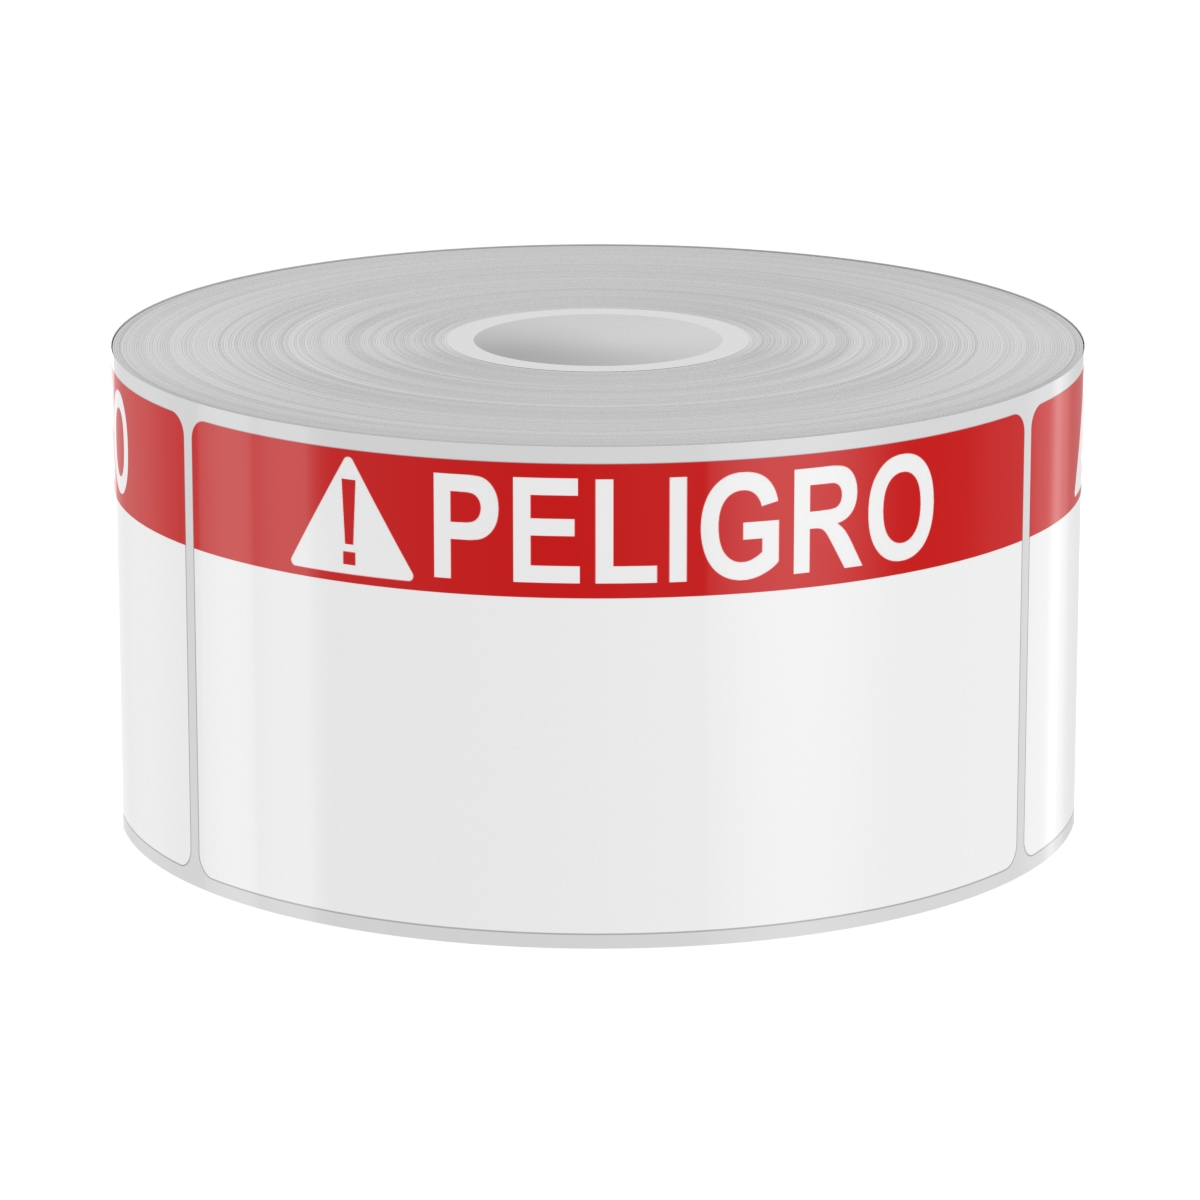 250 2in x 4in Labels with Red PELIGRO Header